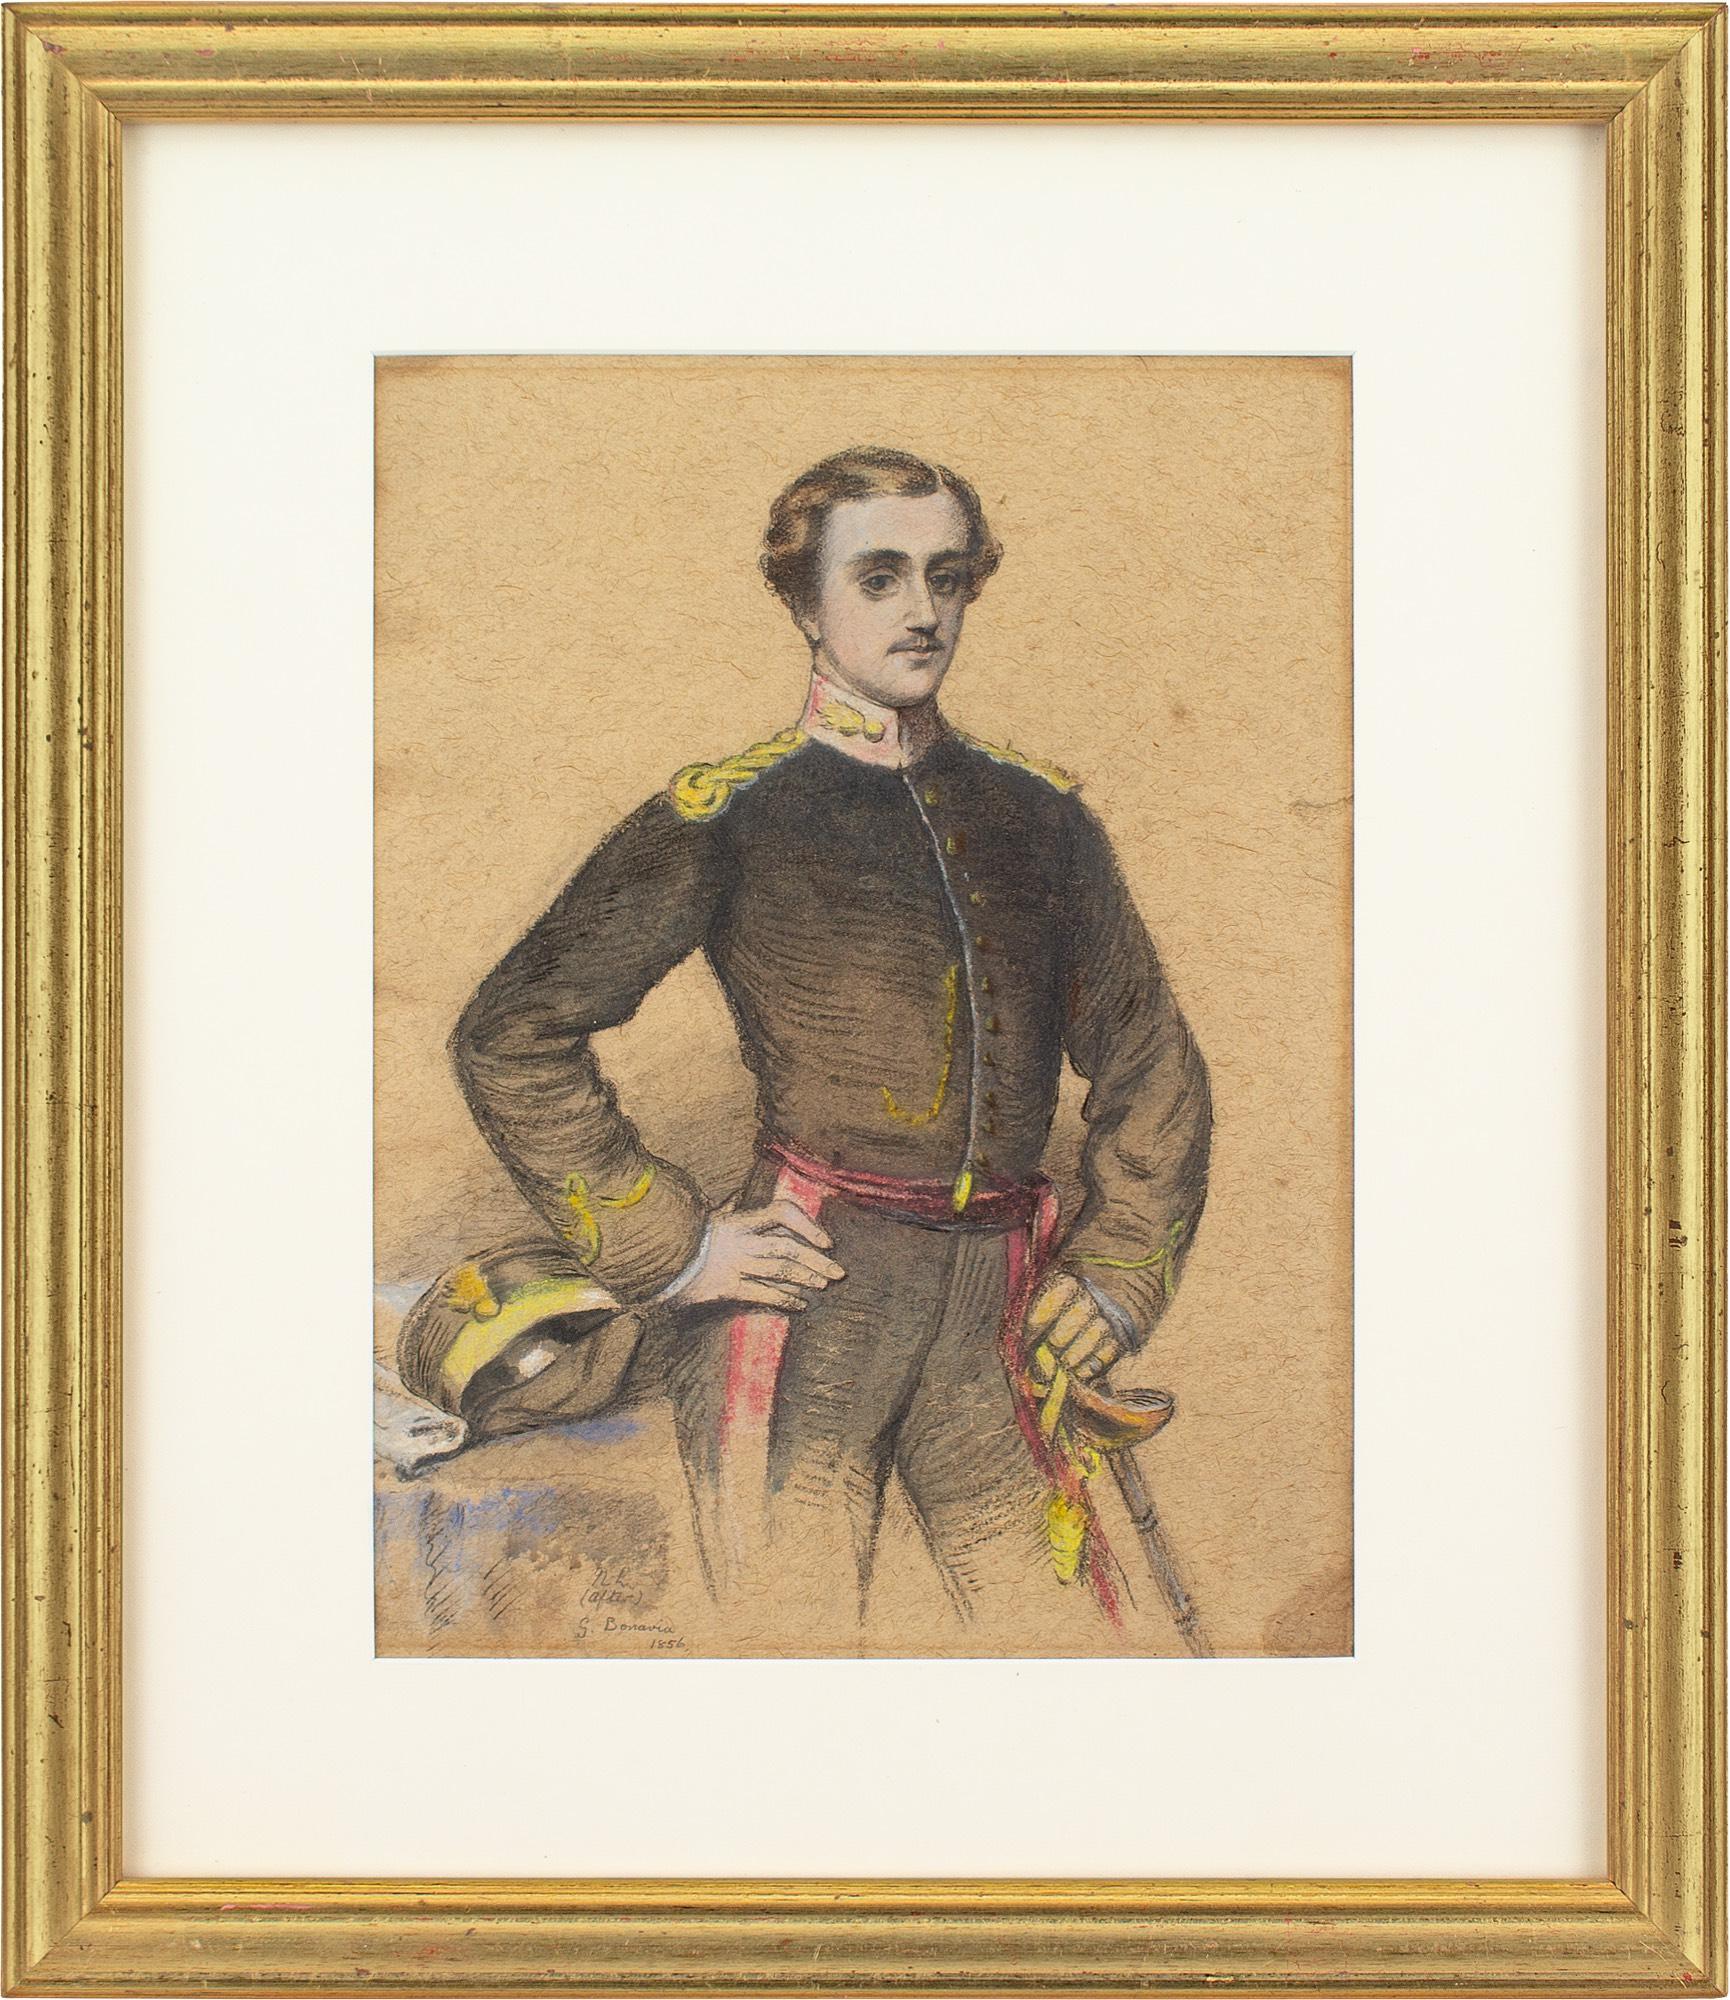 This charming mid-19th-century pastel by Maltese artist George Bonavia (1818-1901) depicts a young British officer in uniform.

Upstanding with his right hand resting on his hip, he carries a confident expression. He appears to be wearing the